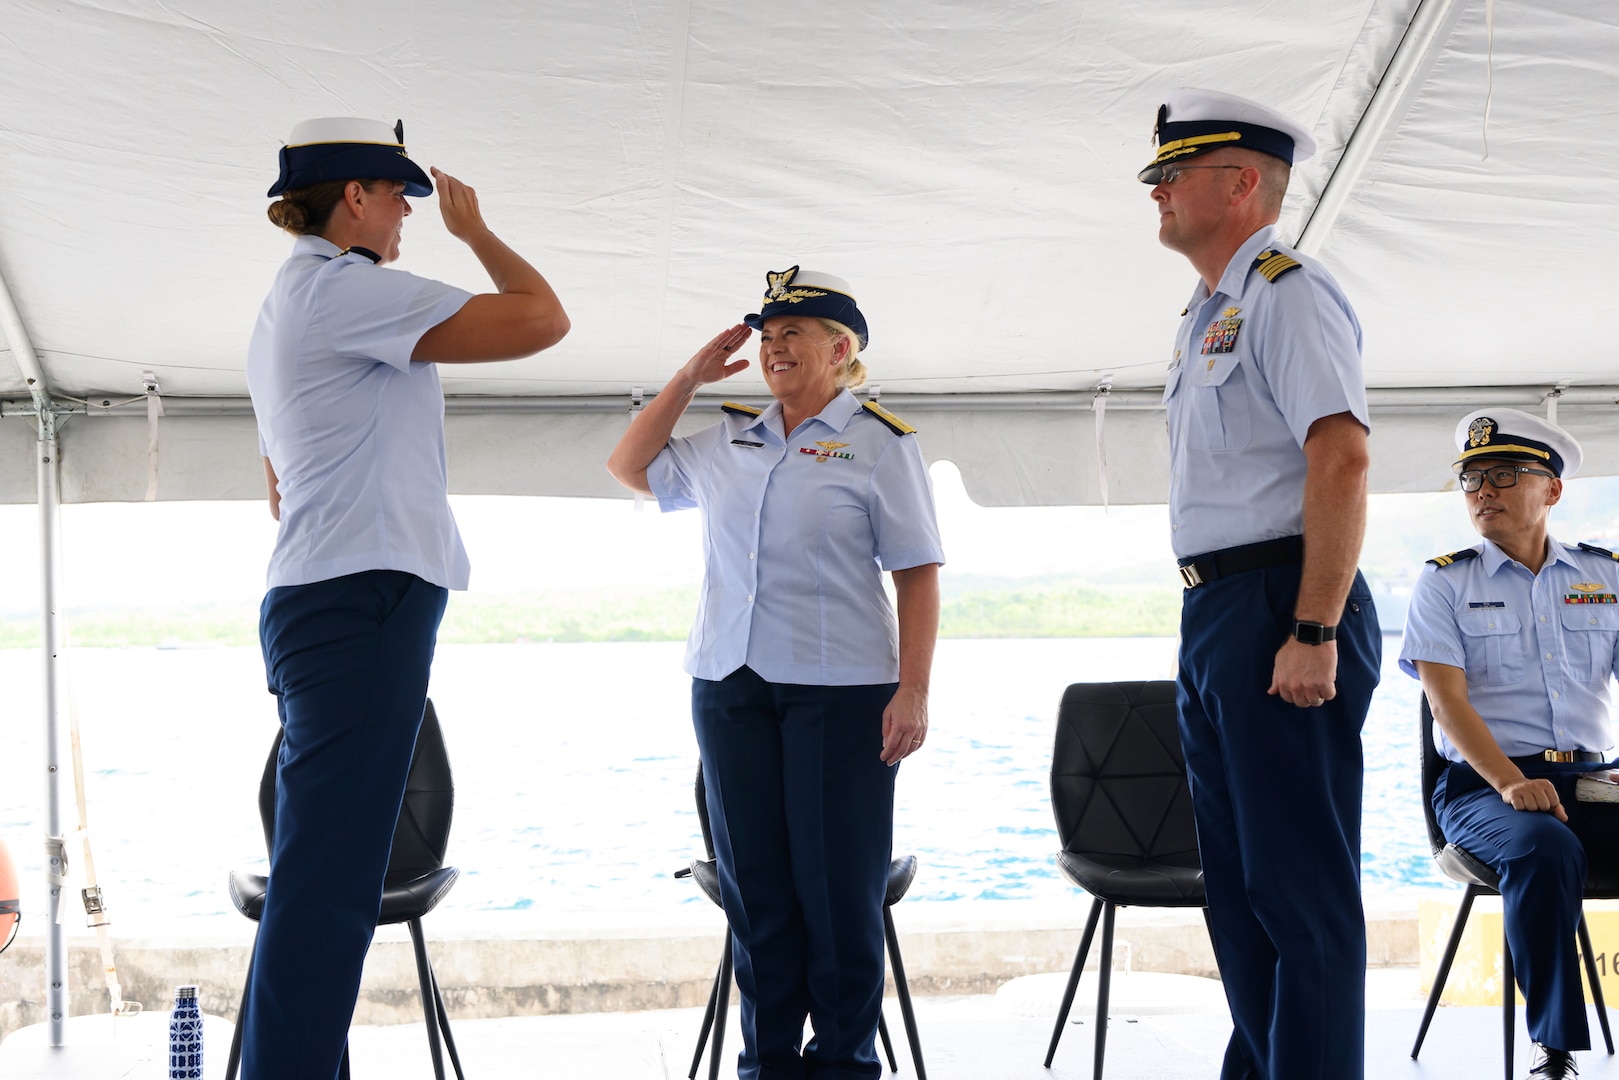 Cmdr. Dana Hiatt assumes command of U.S. Coast Guard Base Guam on Nov. 8, 2023, in a ceremony presided over by Rear Adm. Carola List, commander of Operational Logistics Command. This strategic move aligns with the Service's commitment to increase mission support throughout Oceania. Given Guam's vital importance to national security, this initiative takes center stage. (U.S. Coast Guard photo by David Lau)